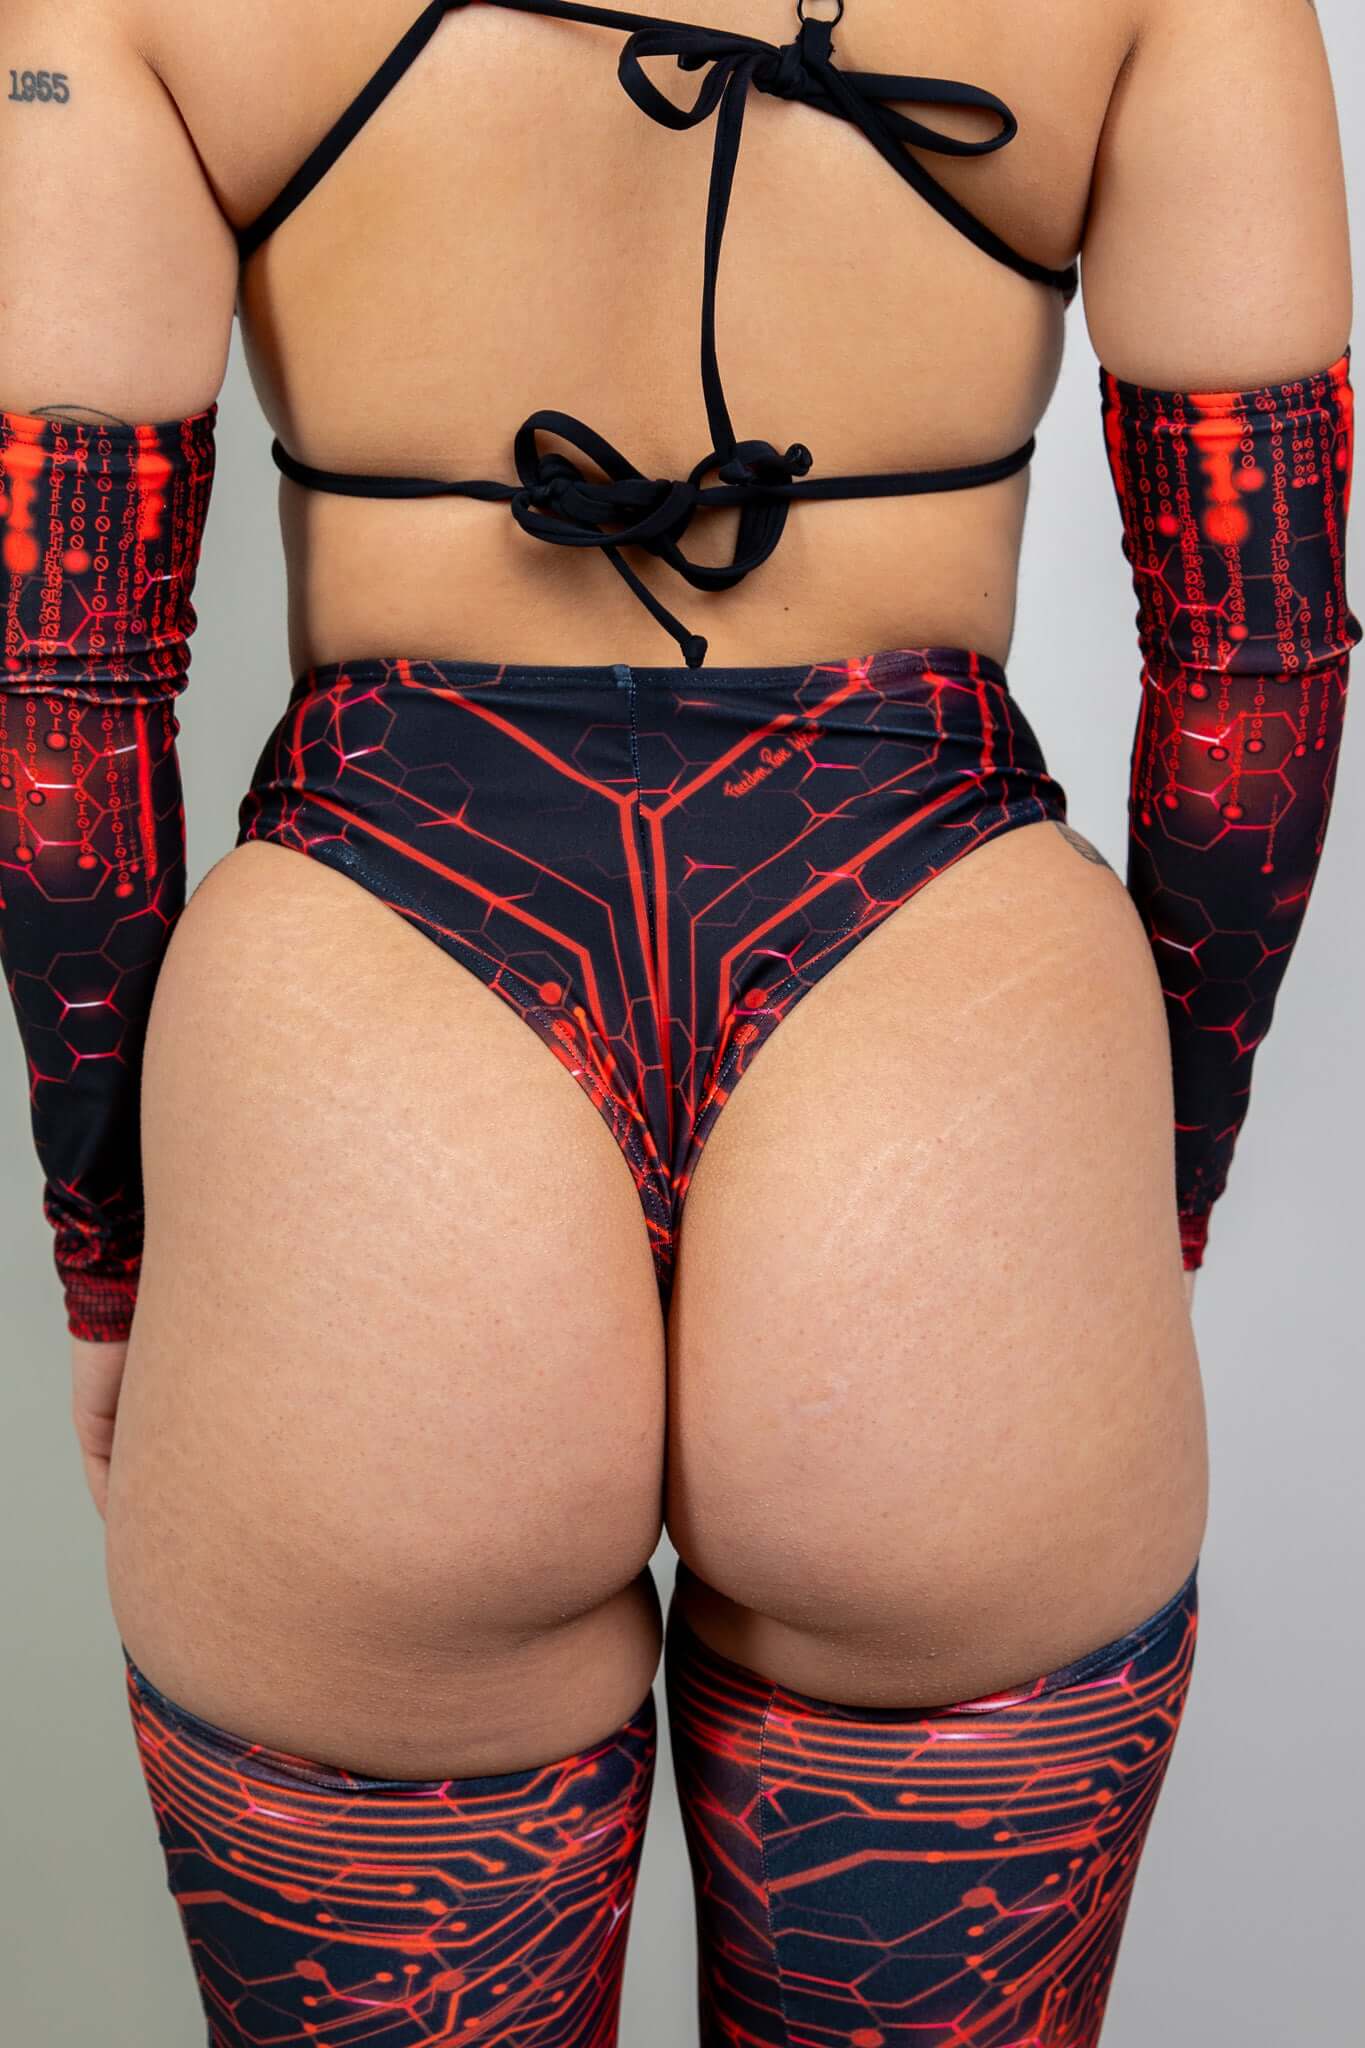 Rear view of a woman in a black and red Freedom Rave Wear high-waisted bottom featuring a circuit design, tied at the back, paired with matching arm sleeves